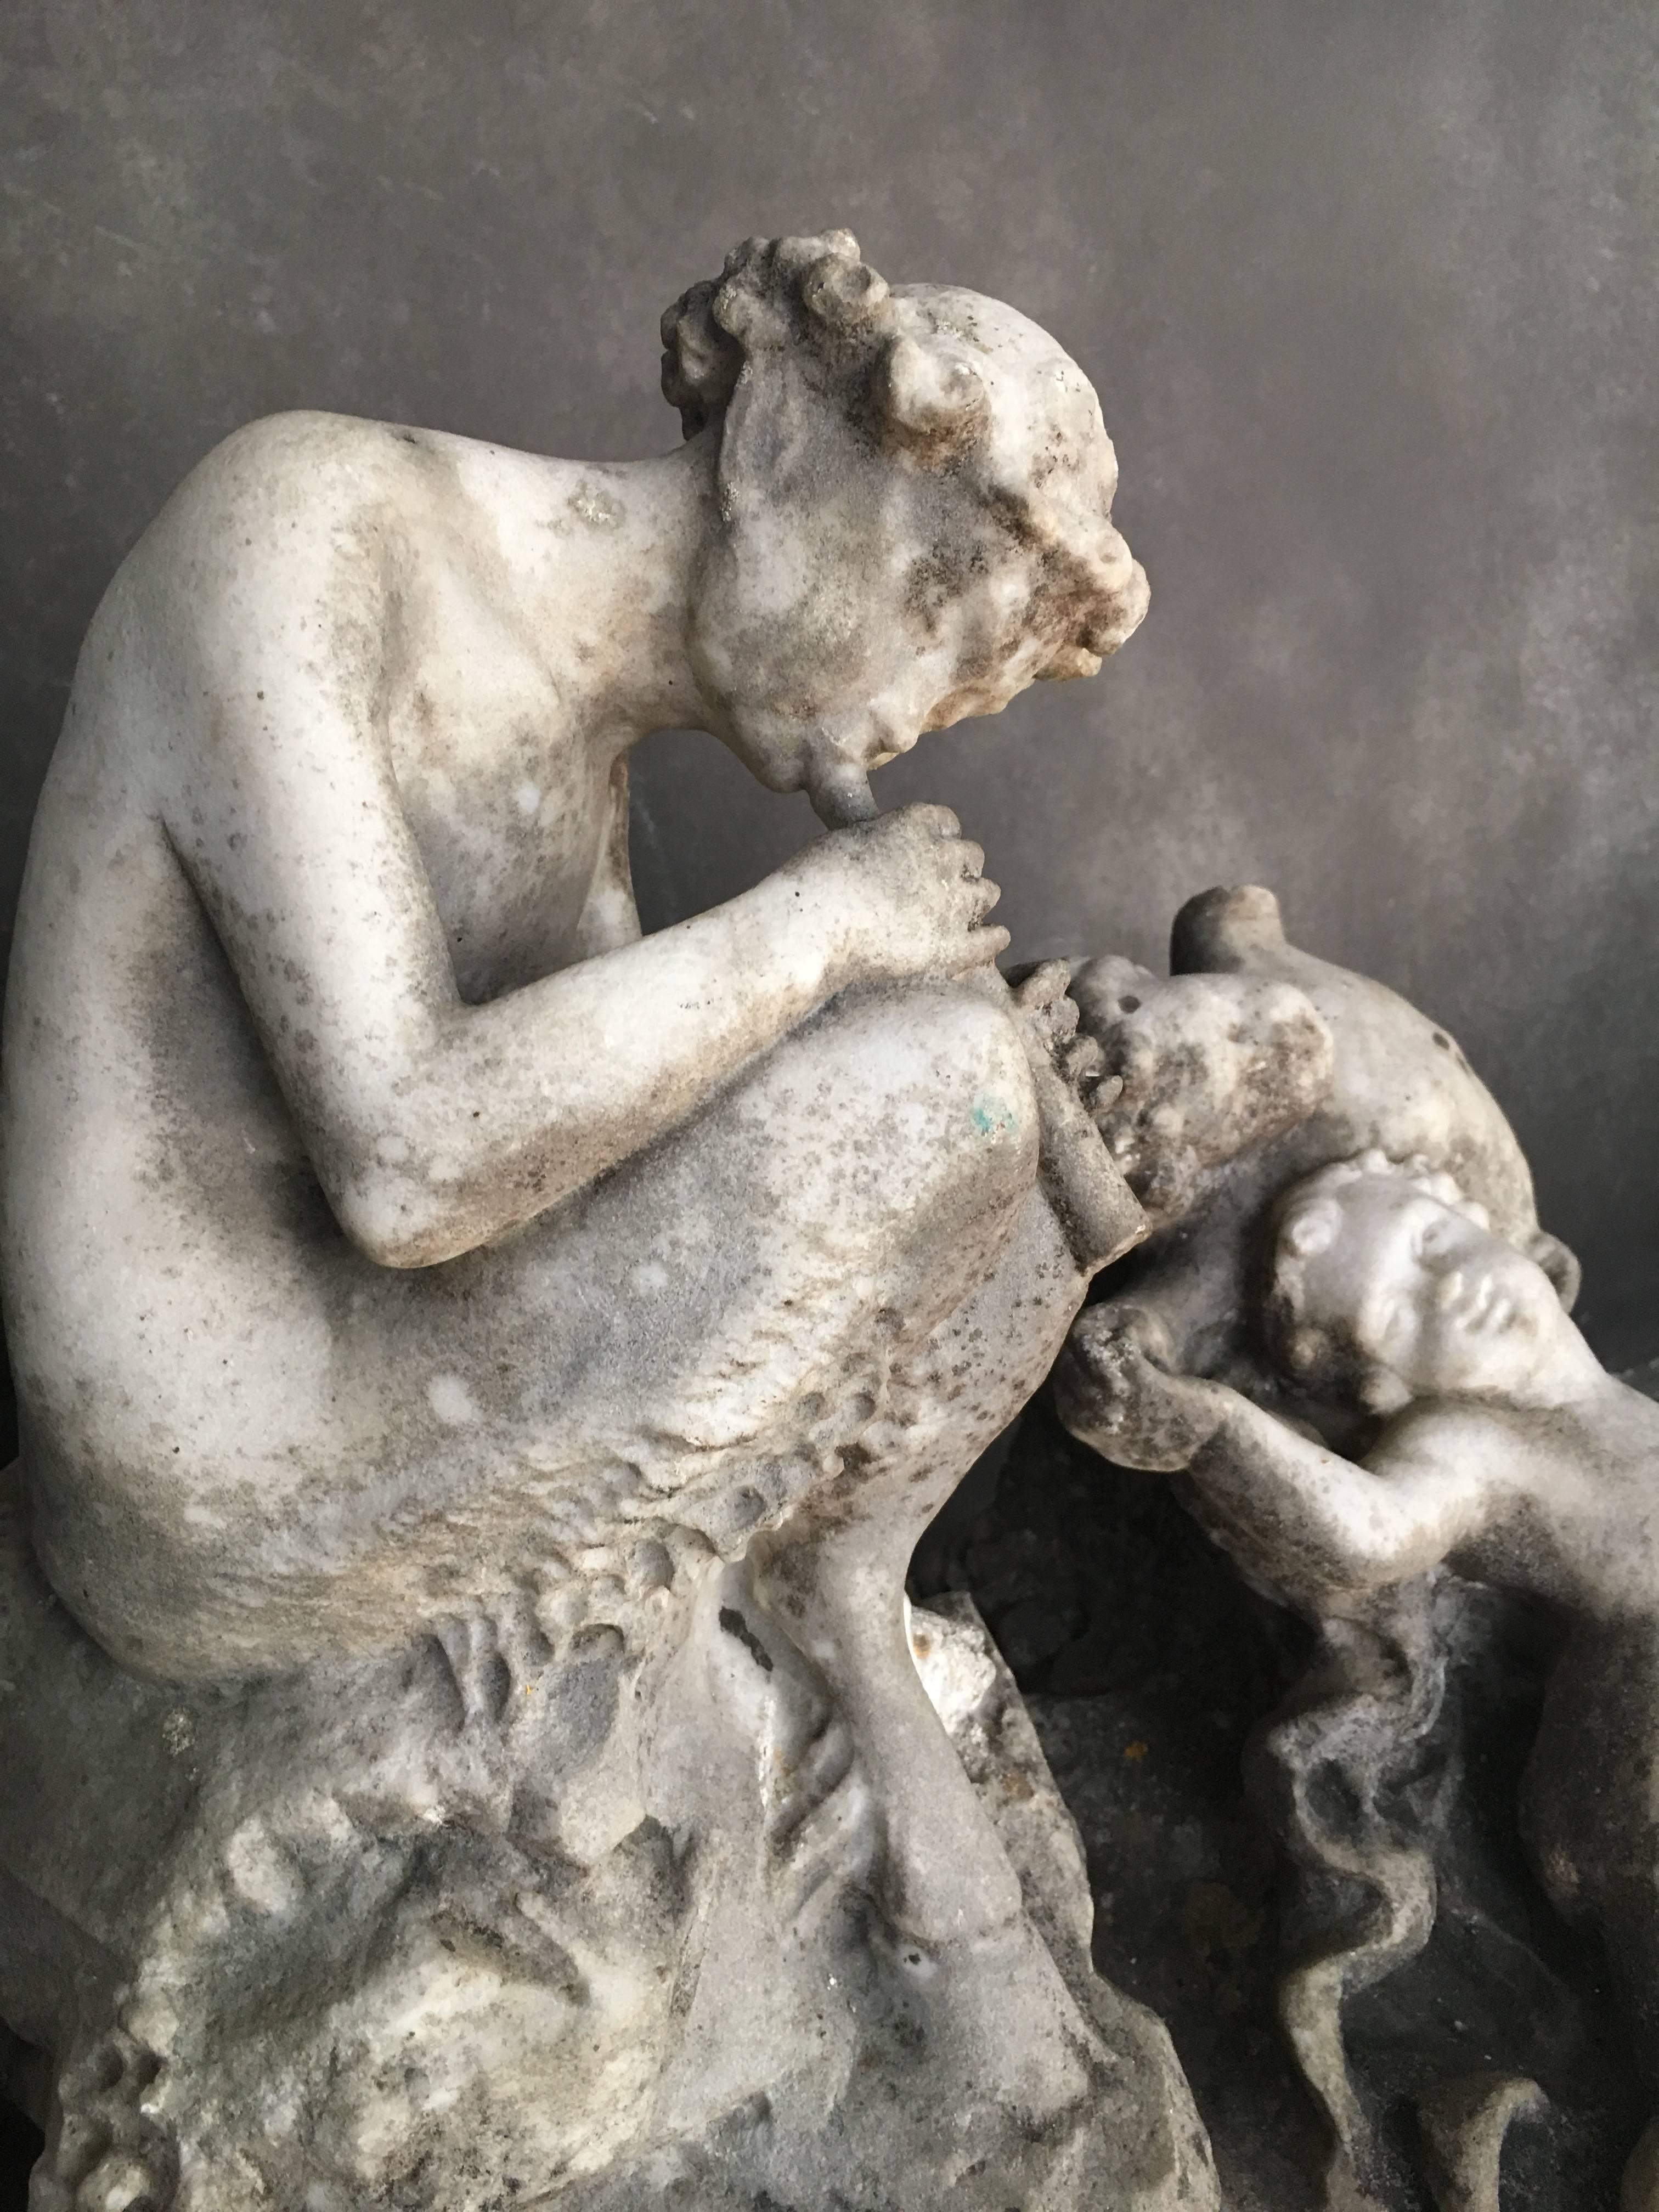 Italian marble sculpture from the late 18th century. A faun is showing in the middle. The sculpture has a beautiful patina with old broken-off pieces.
Please note: This item is located in our New York City Studio and will be shipped from there.